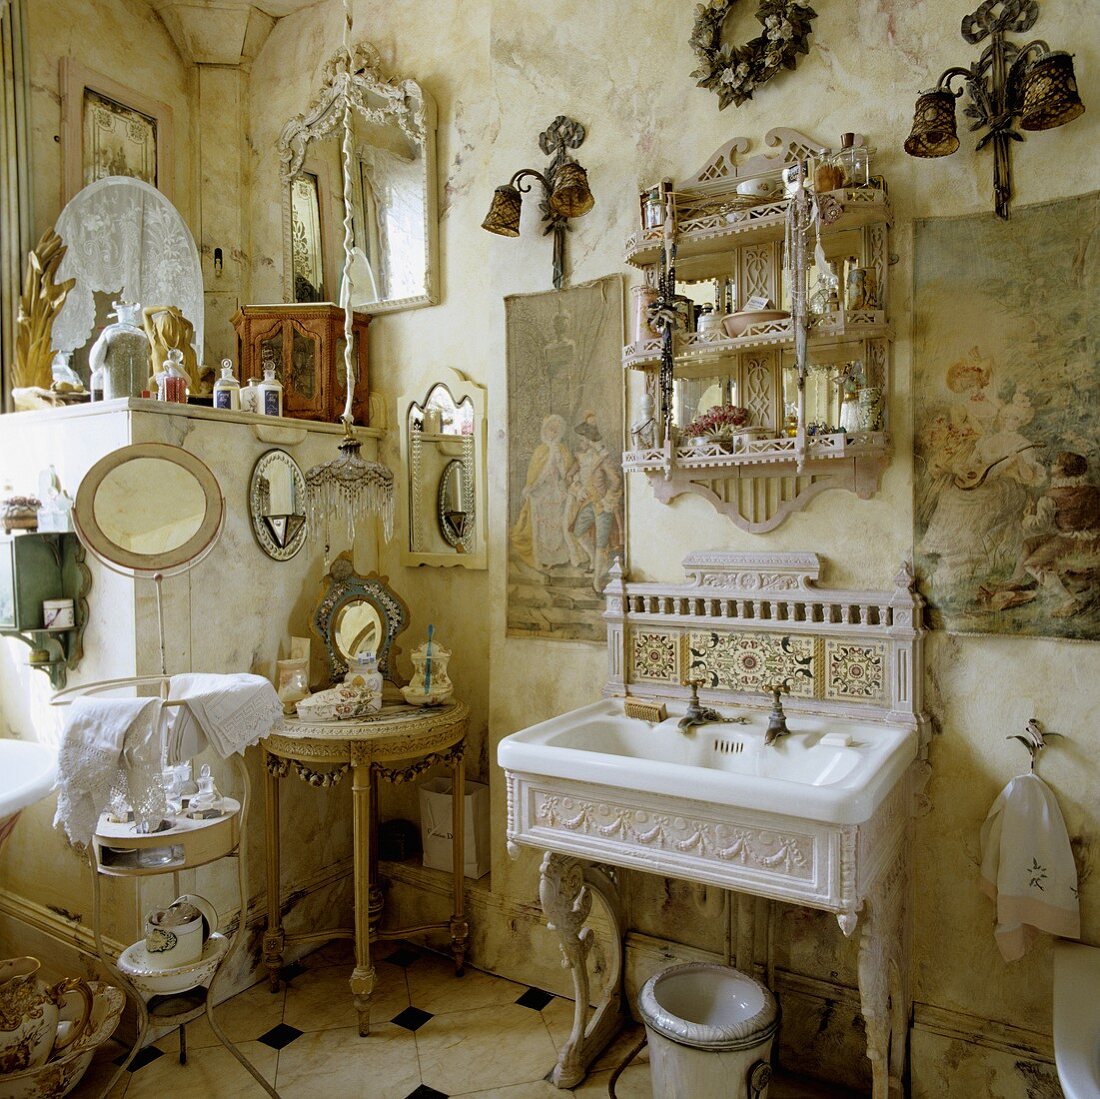 A Rococo-style bathroom - white wash basin with a cast iron frame and playful accessories